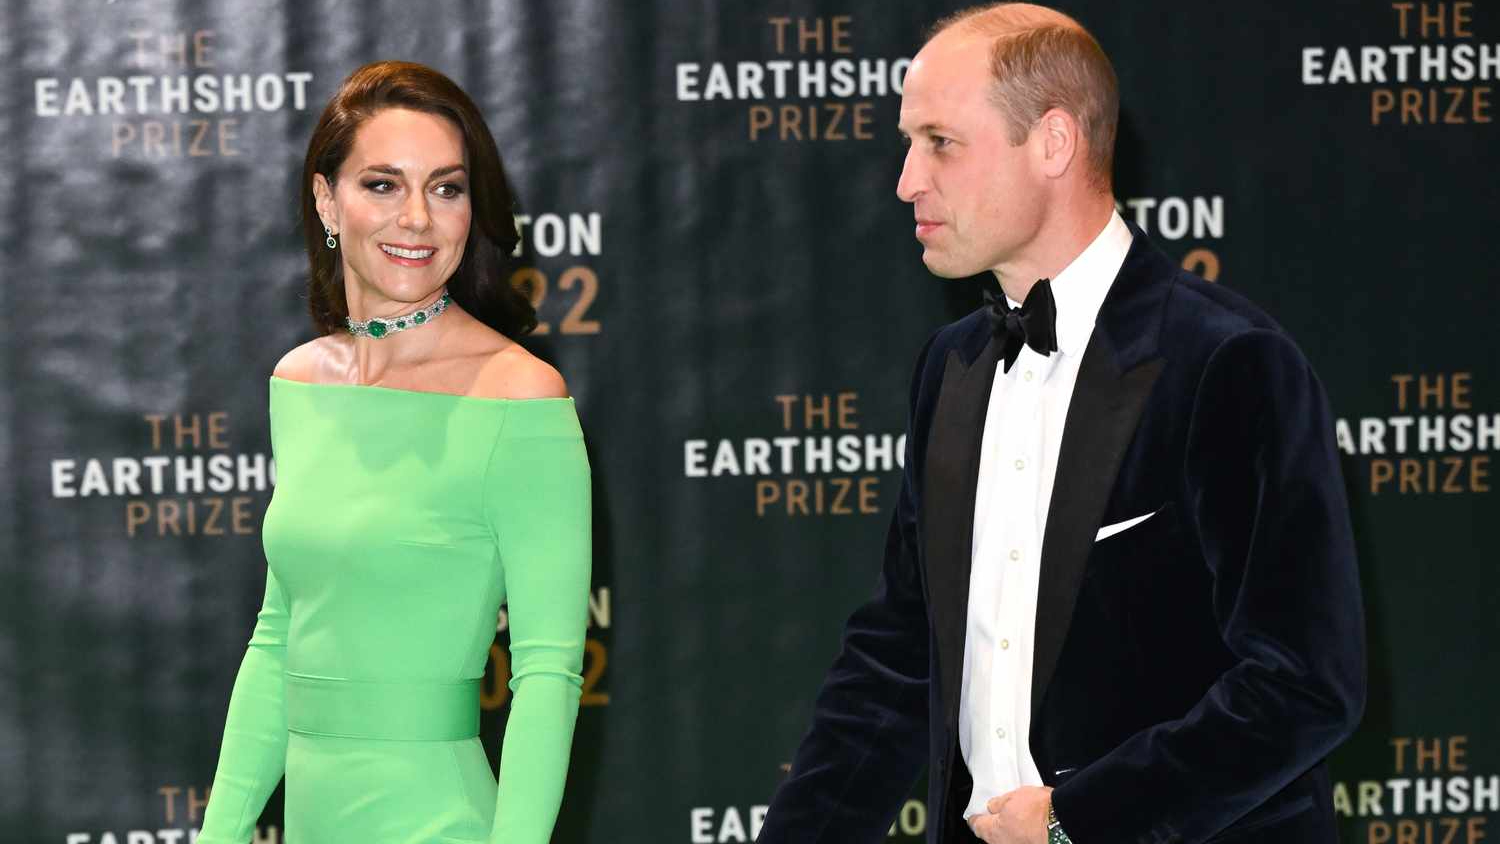 Kate Middleton finds herself in Twitter madness after Earthshot lends her green dress and it’s hilarious!

+2023